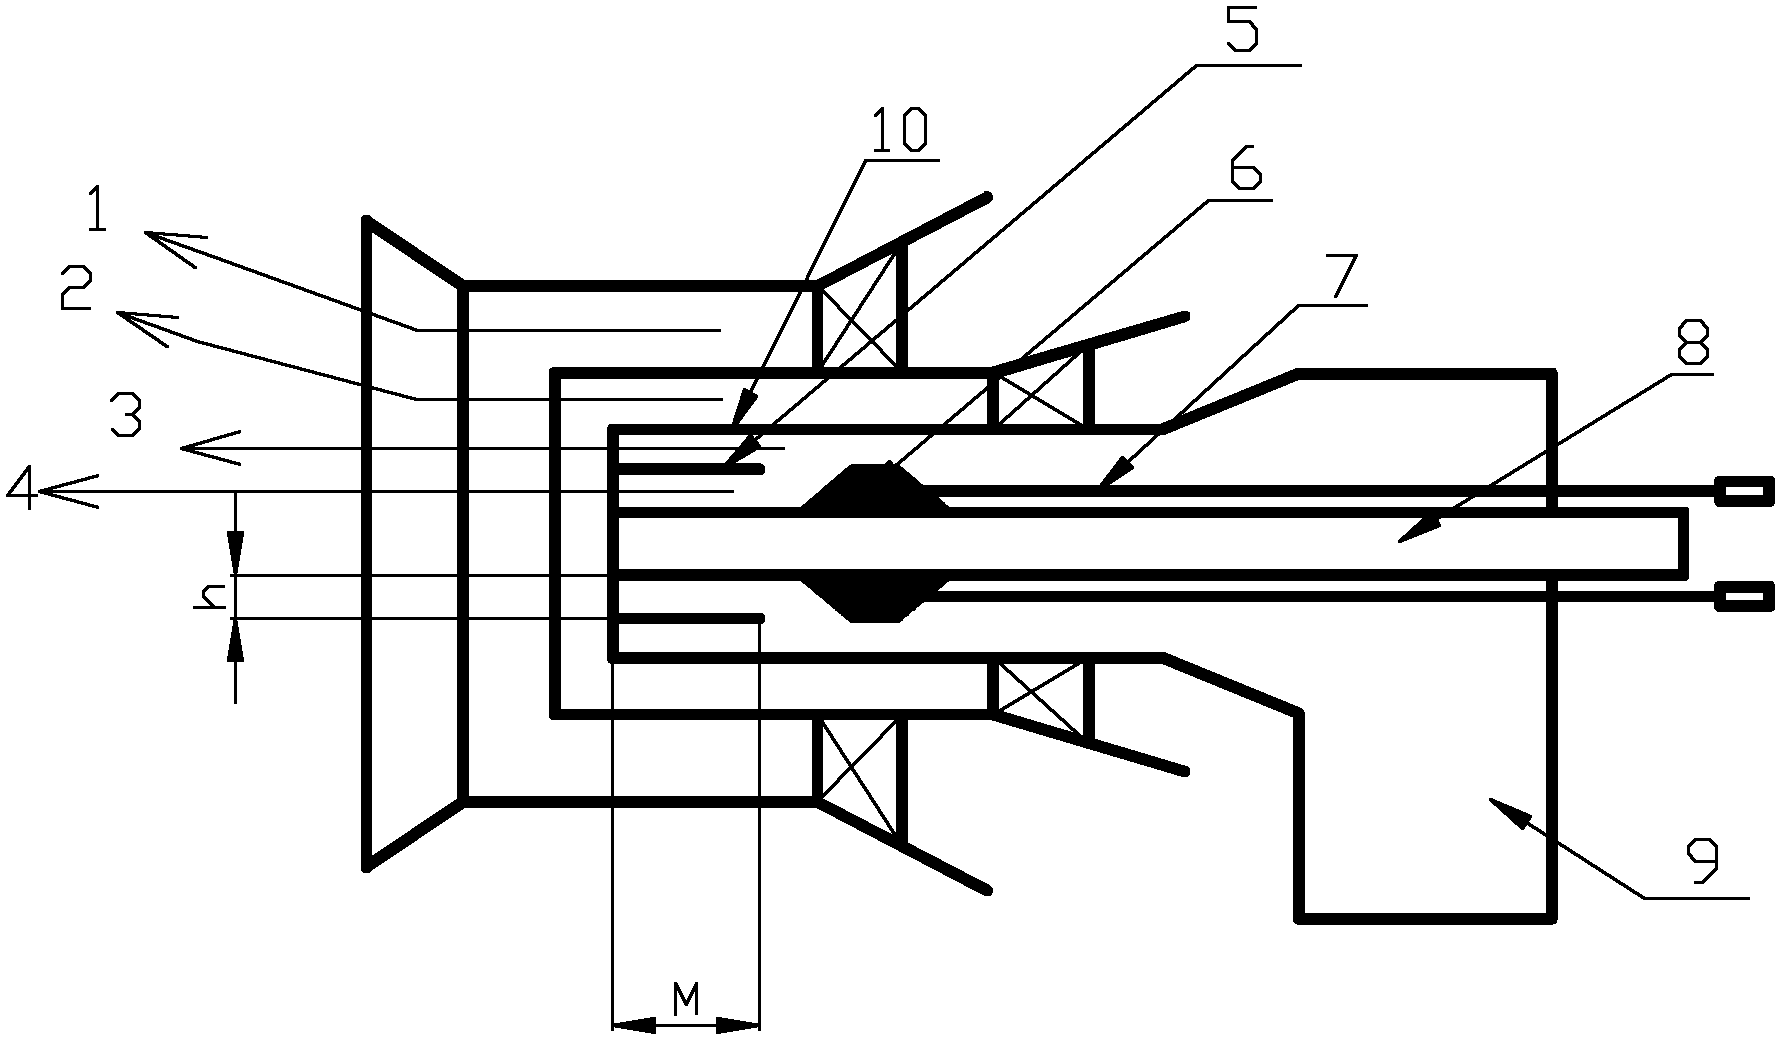 Variable-section cyclone burner